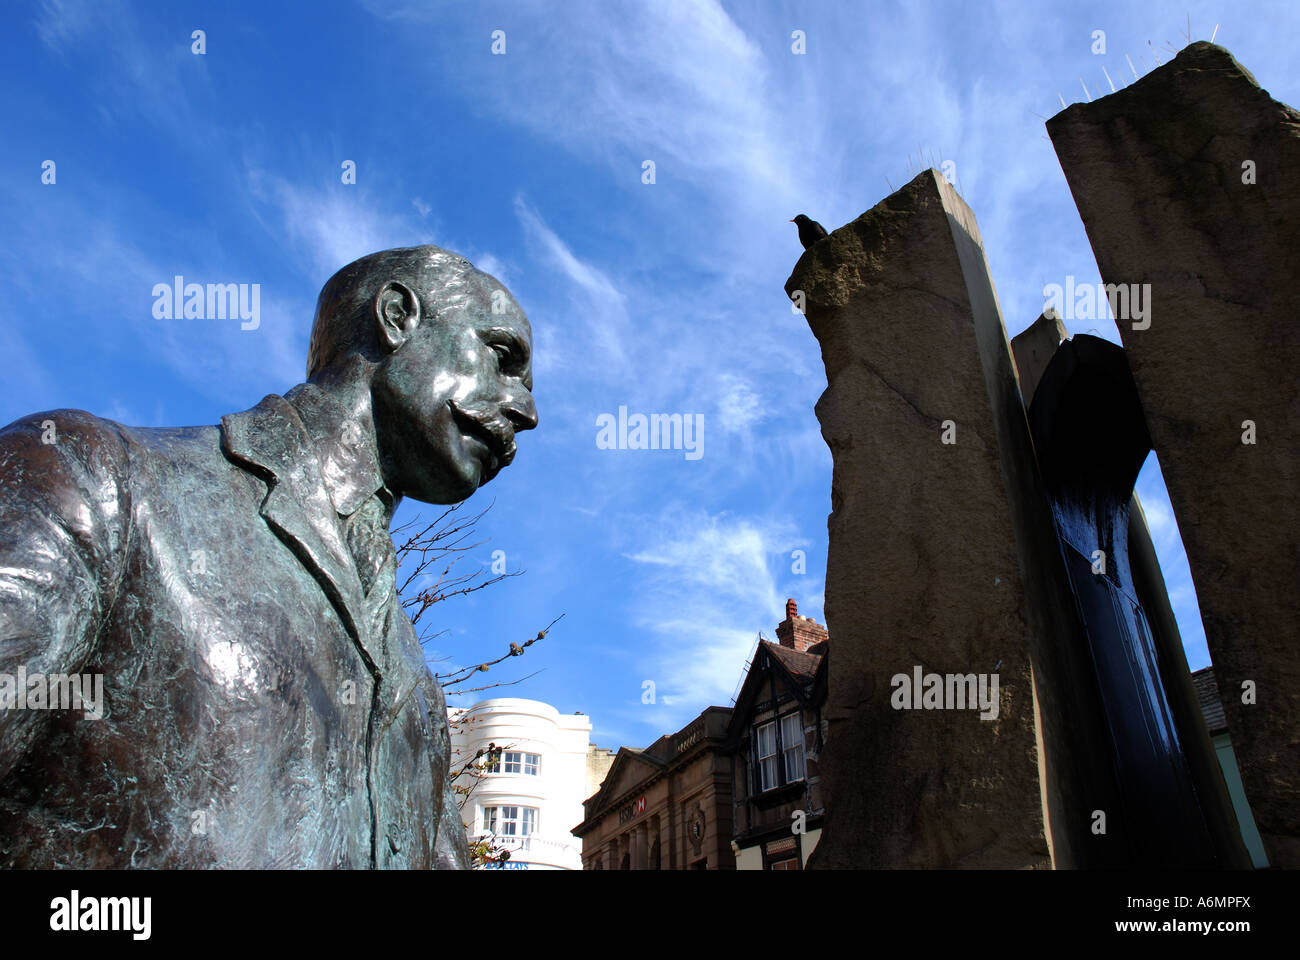 Sir Edward Elgar statue et fontaine Enigma, Great Malvern, Worcestershire, Angleterre, RU Banque D'Images